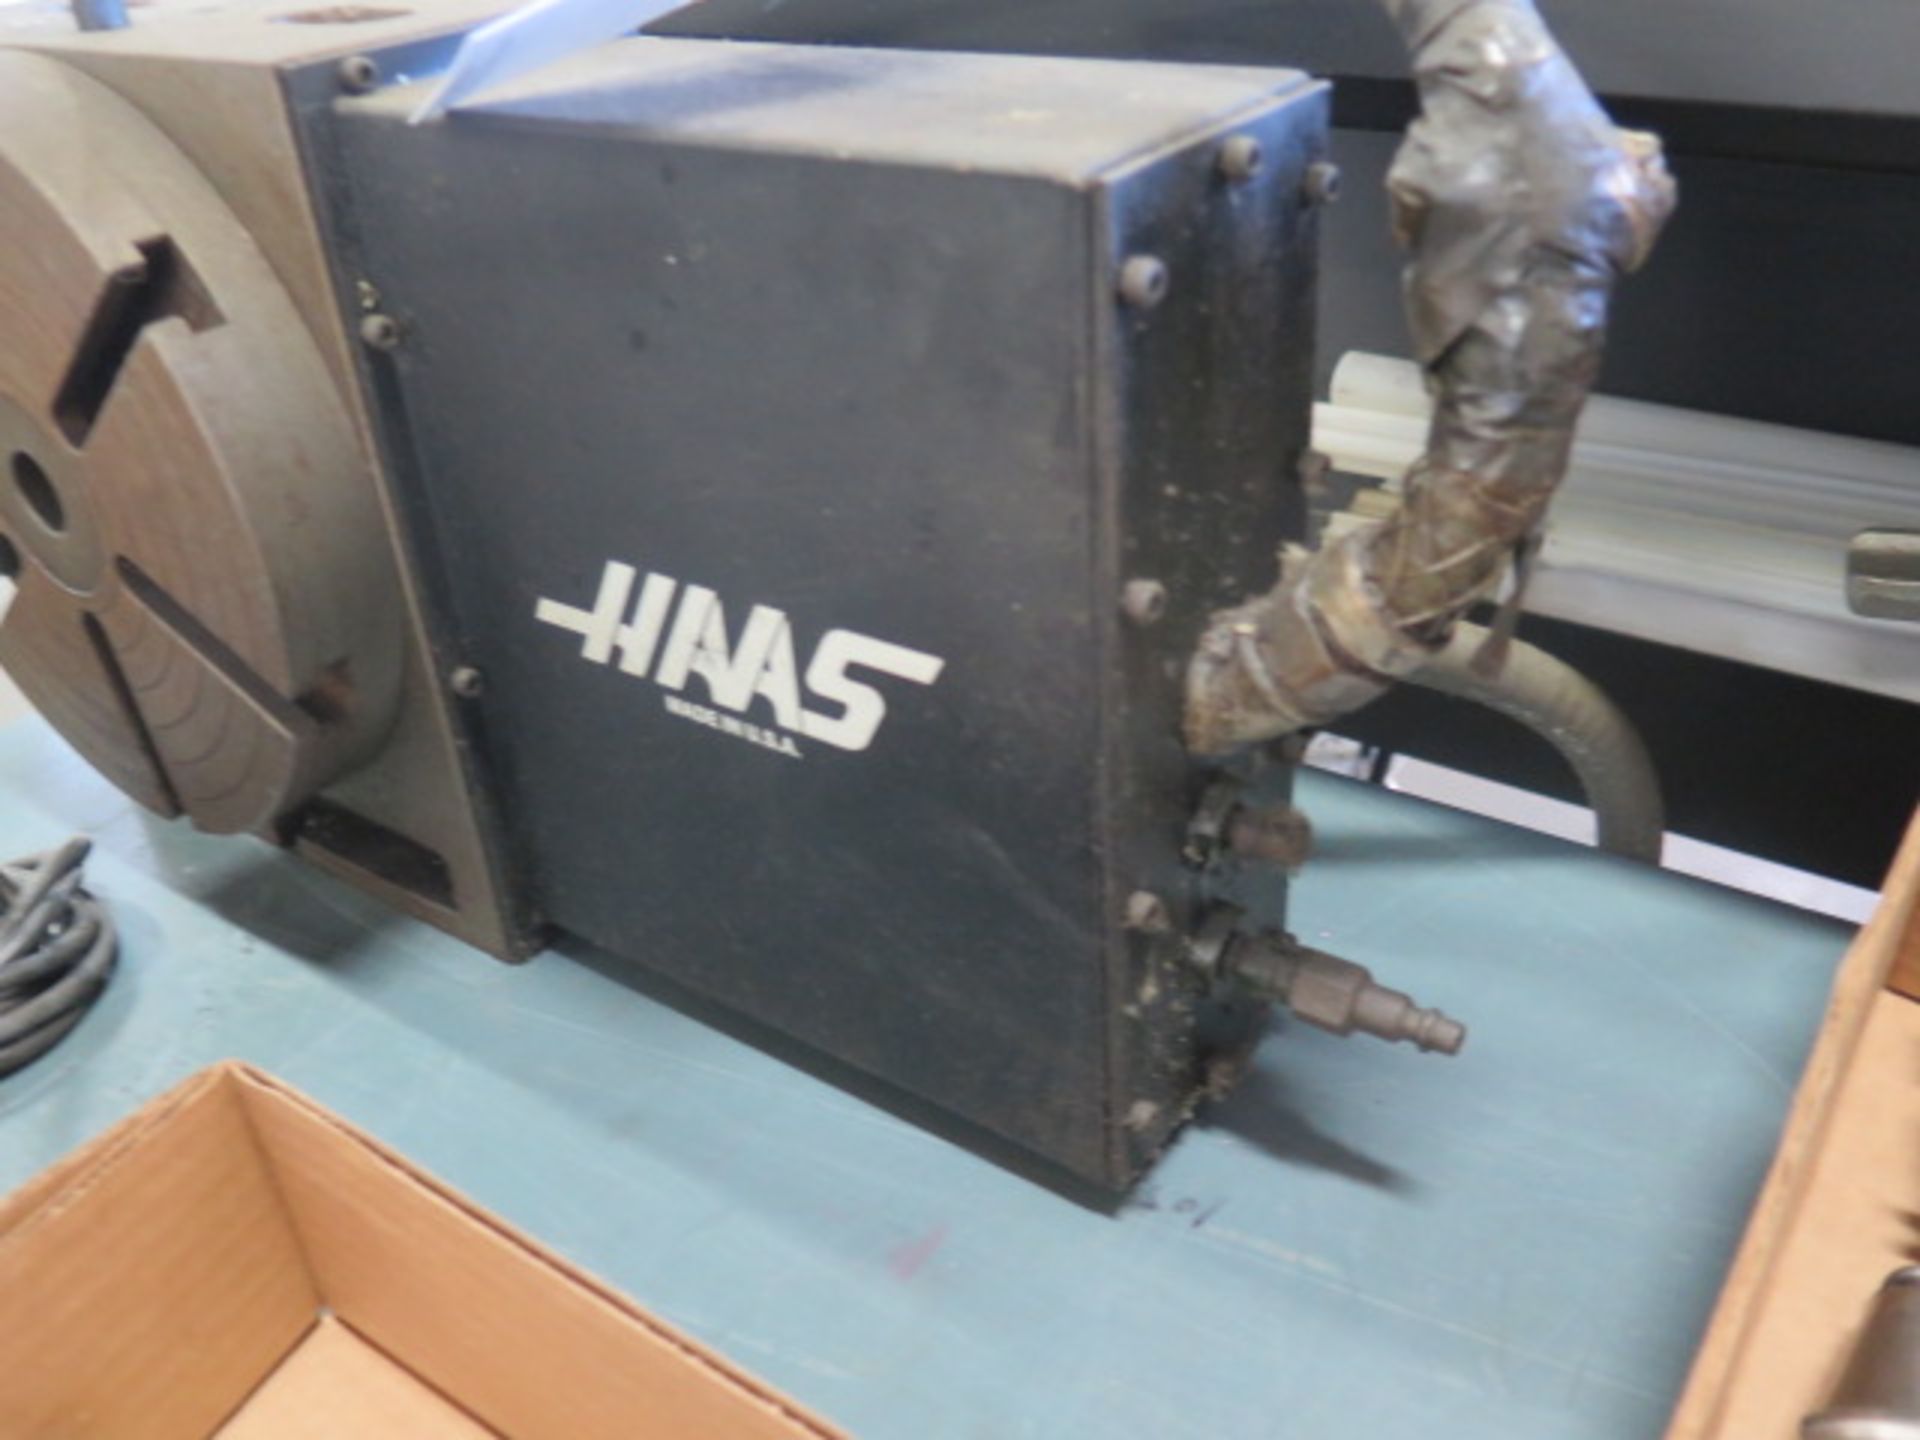 Haas 4th Axis 9" Rotary Head w/ Haas Servo Controller (SOLD AS-IS - NO WARRANTY) - Image 4 of 6